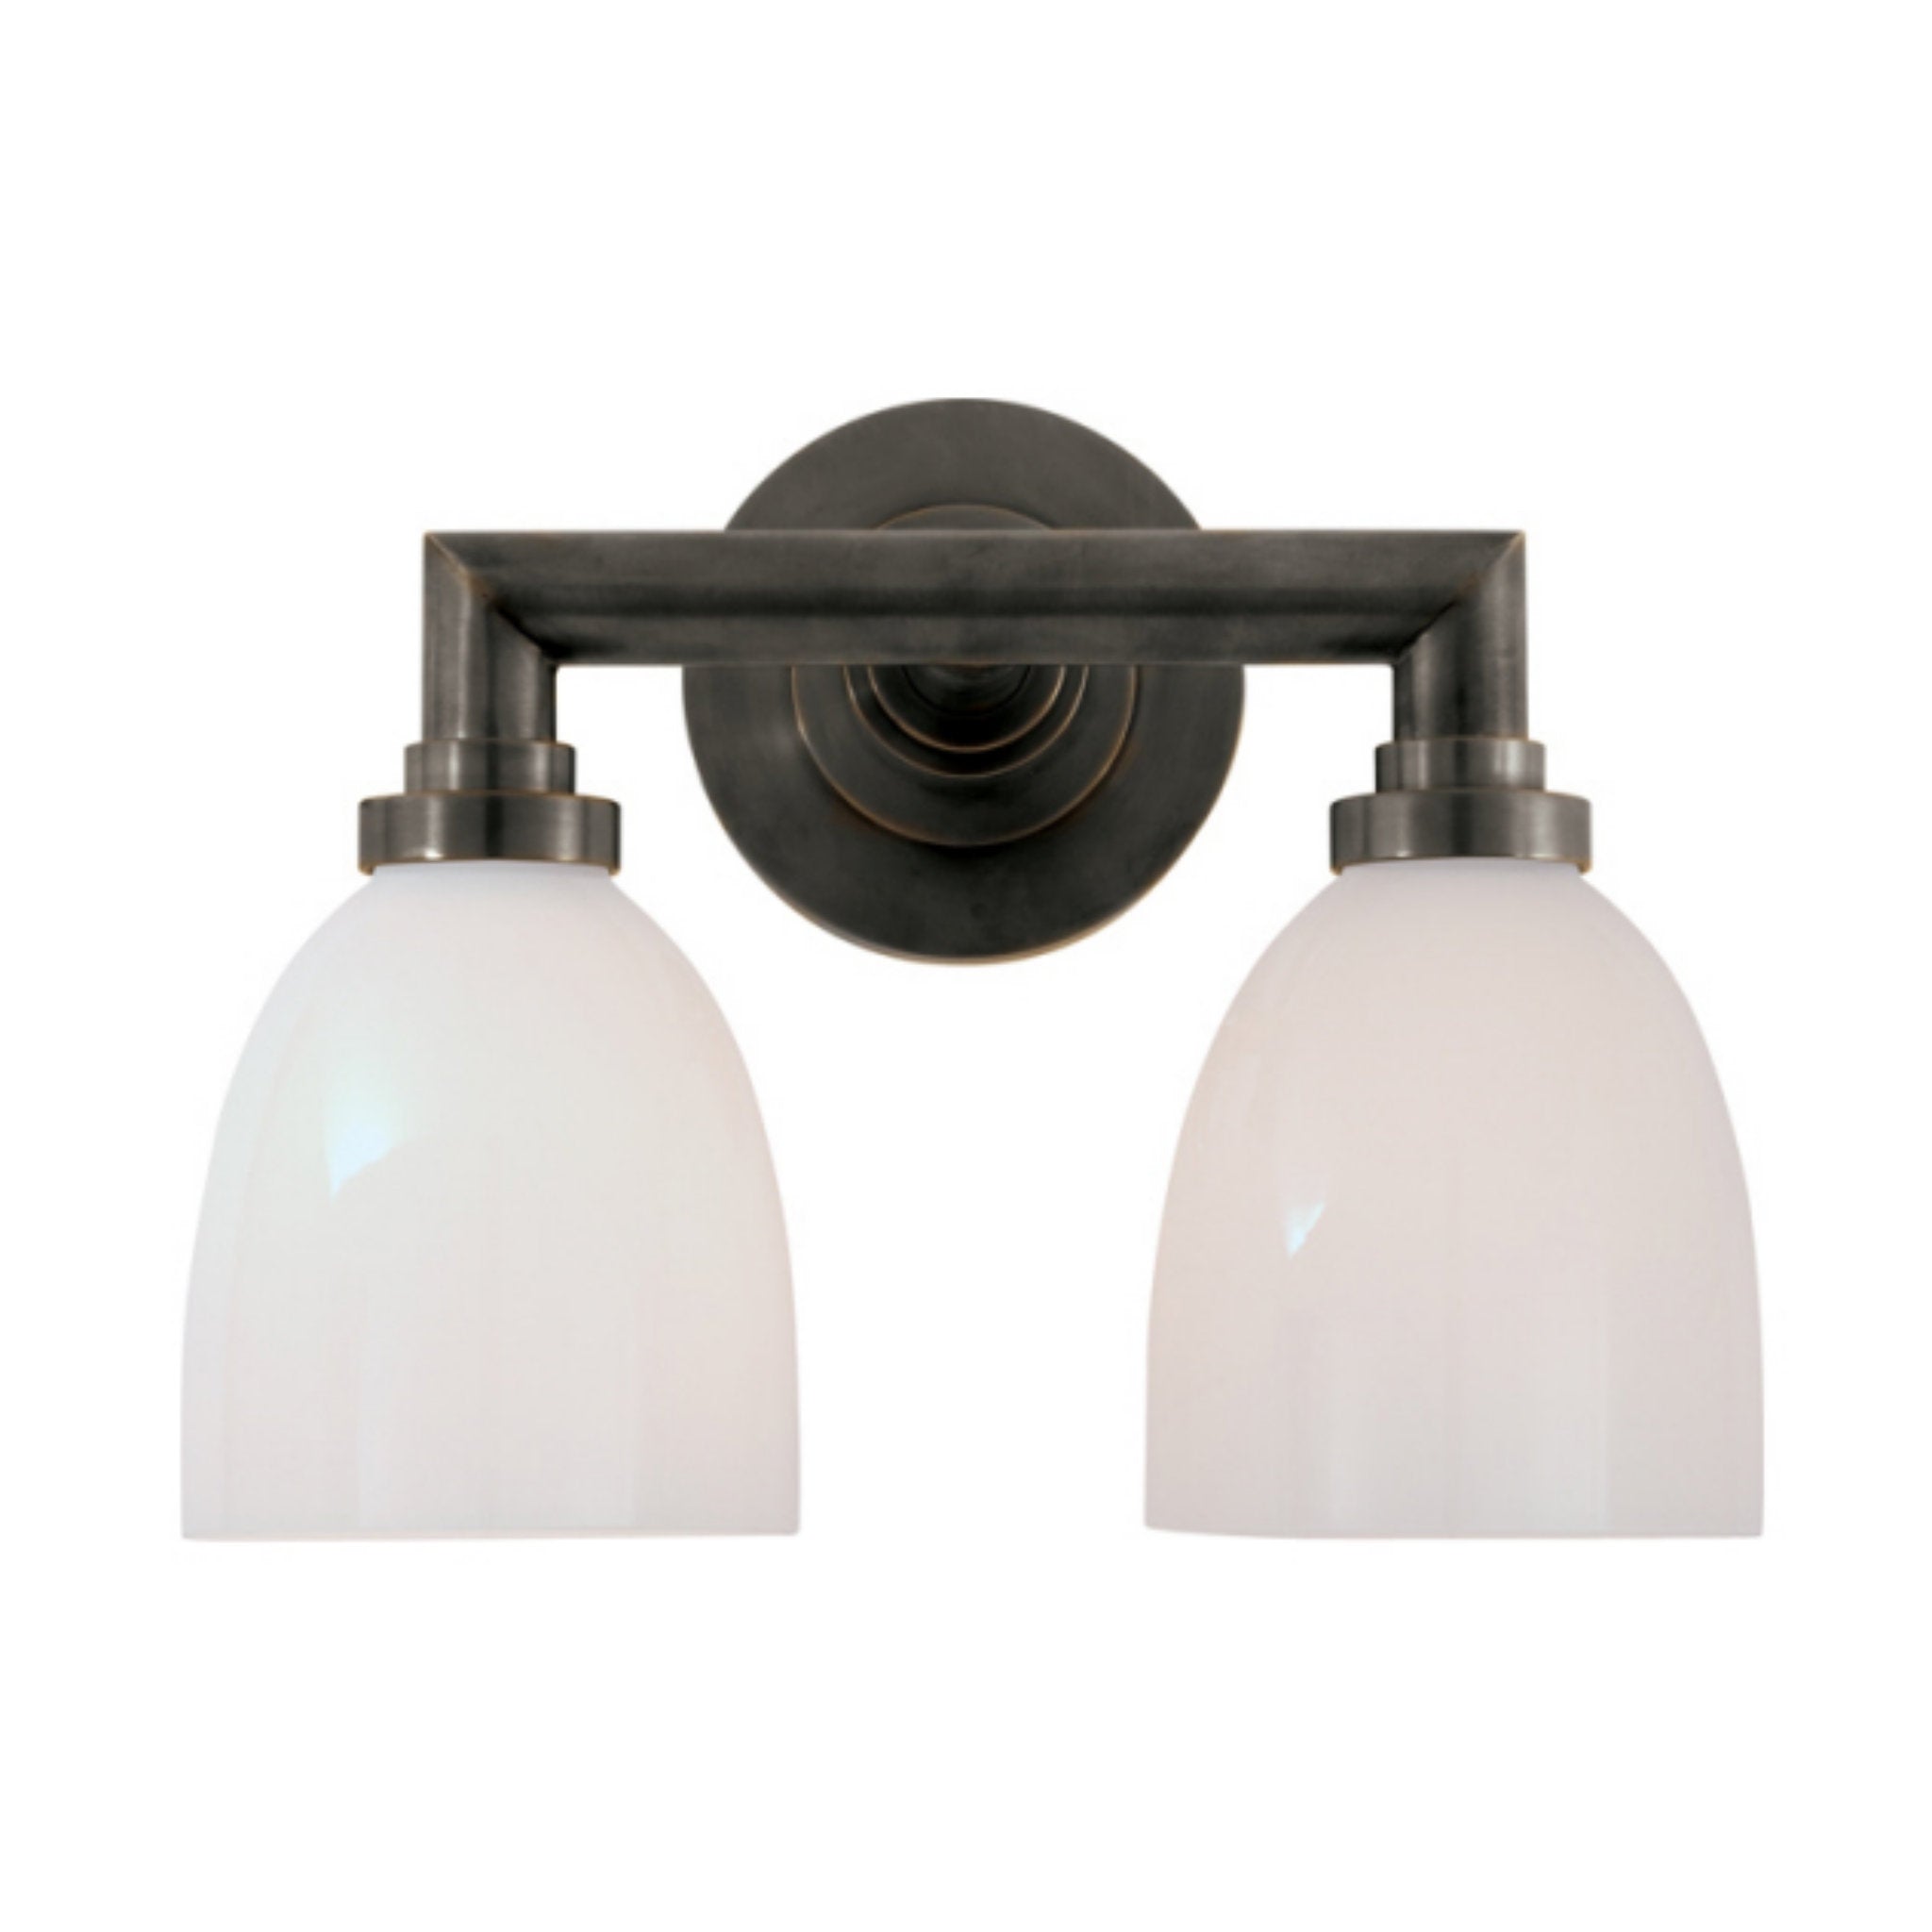 Chapman & Myers Wilton Double Bath Light in Bronze with White Glass